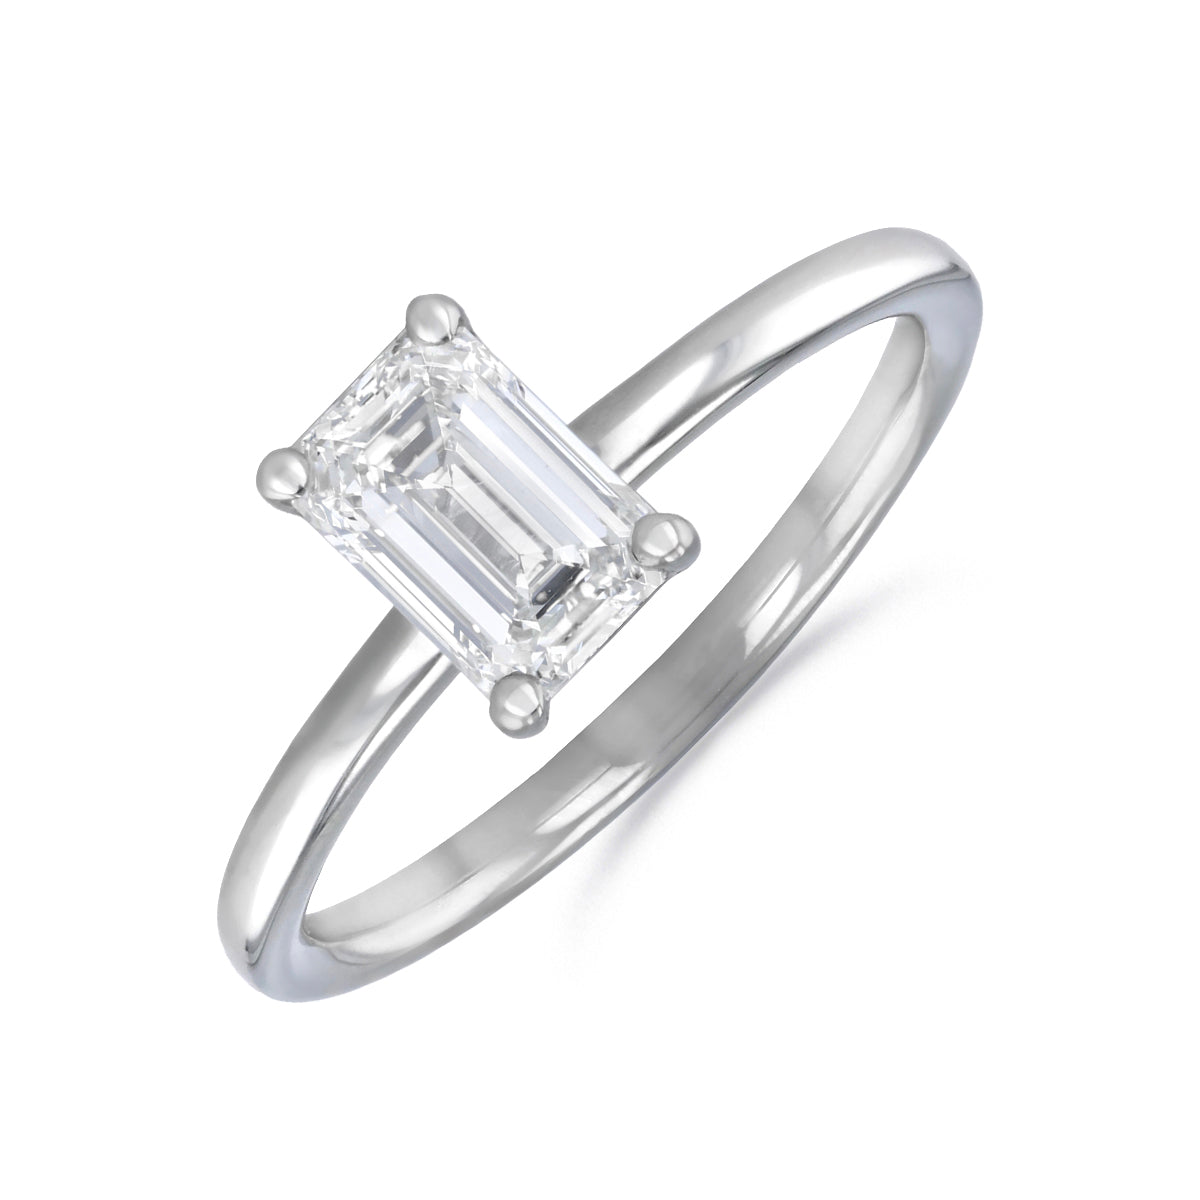 2-00ct-sofia-emerald-cut-solitaire-diamond-engagement-ring-18ct-white-gold